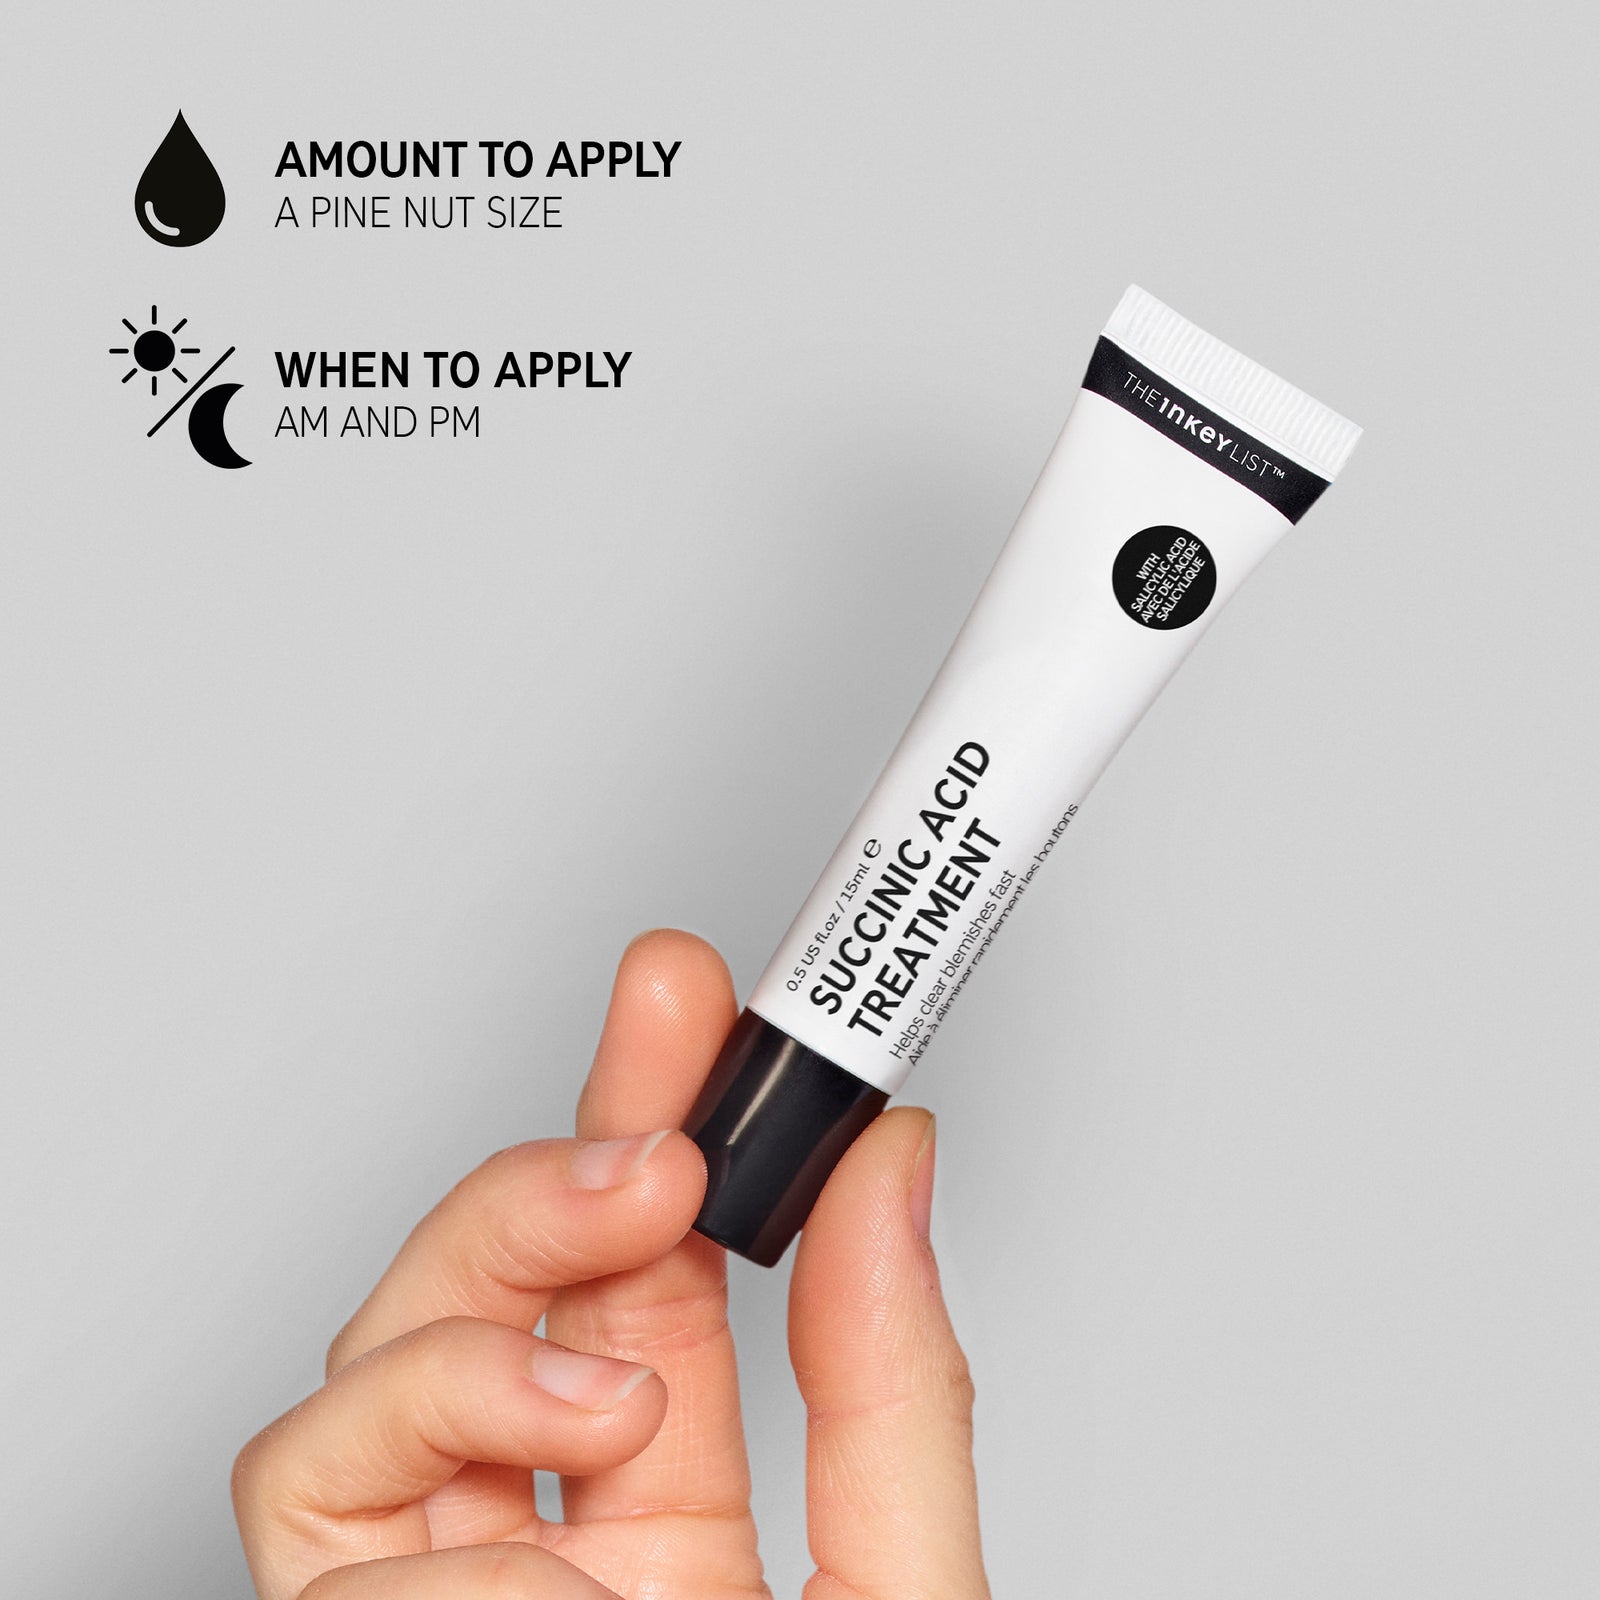 Hand holding a tube of Succinic Acid Treatment against a grey background, annotated with black text explaining amount to apply (pine nut sized) and when to apply (AM and PM) 